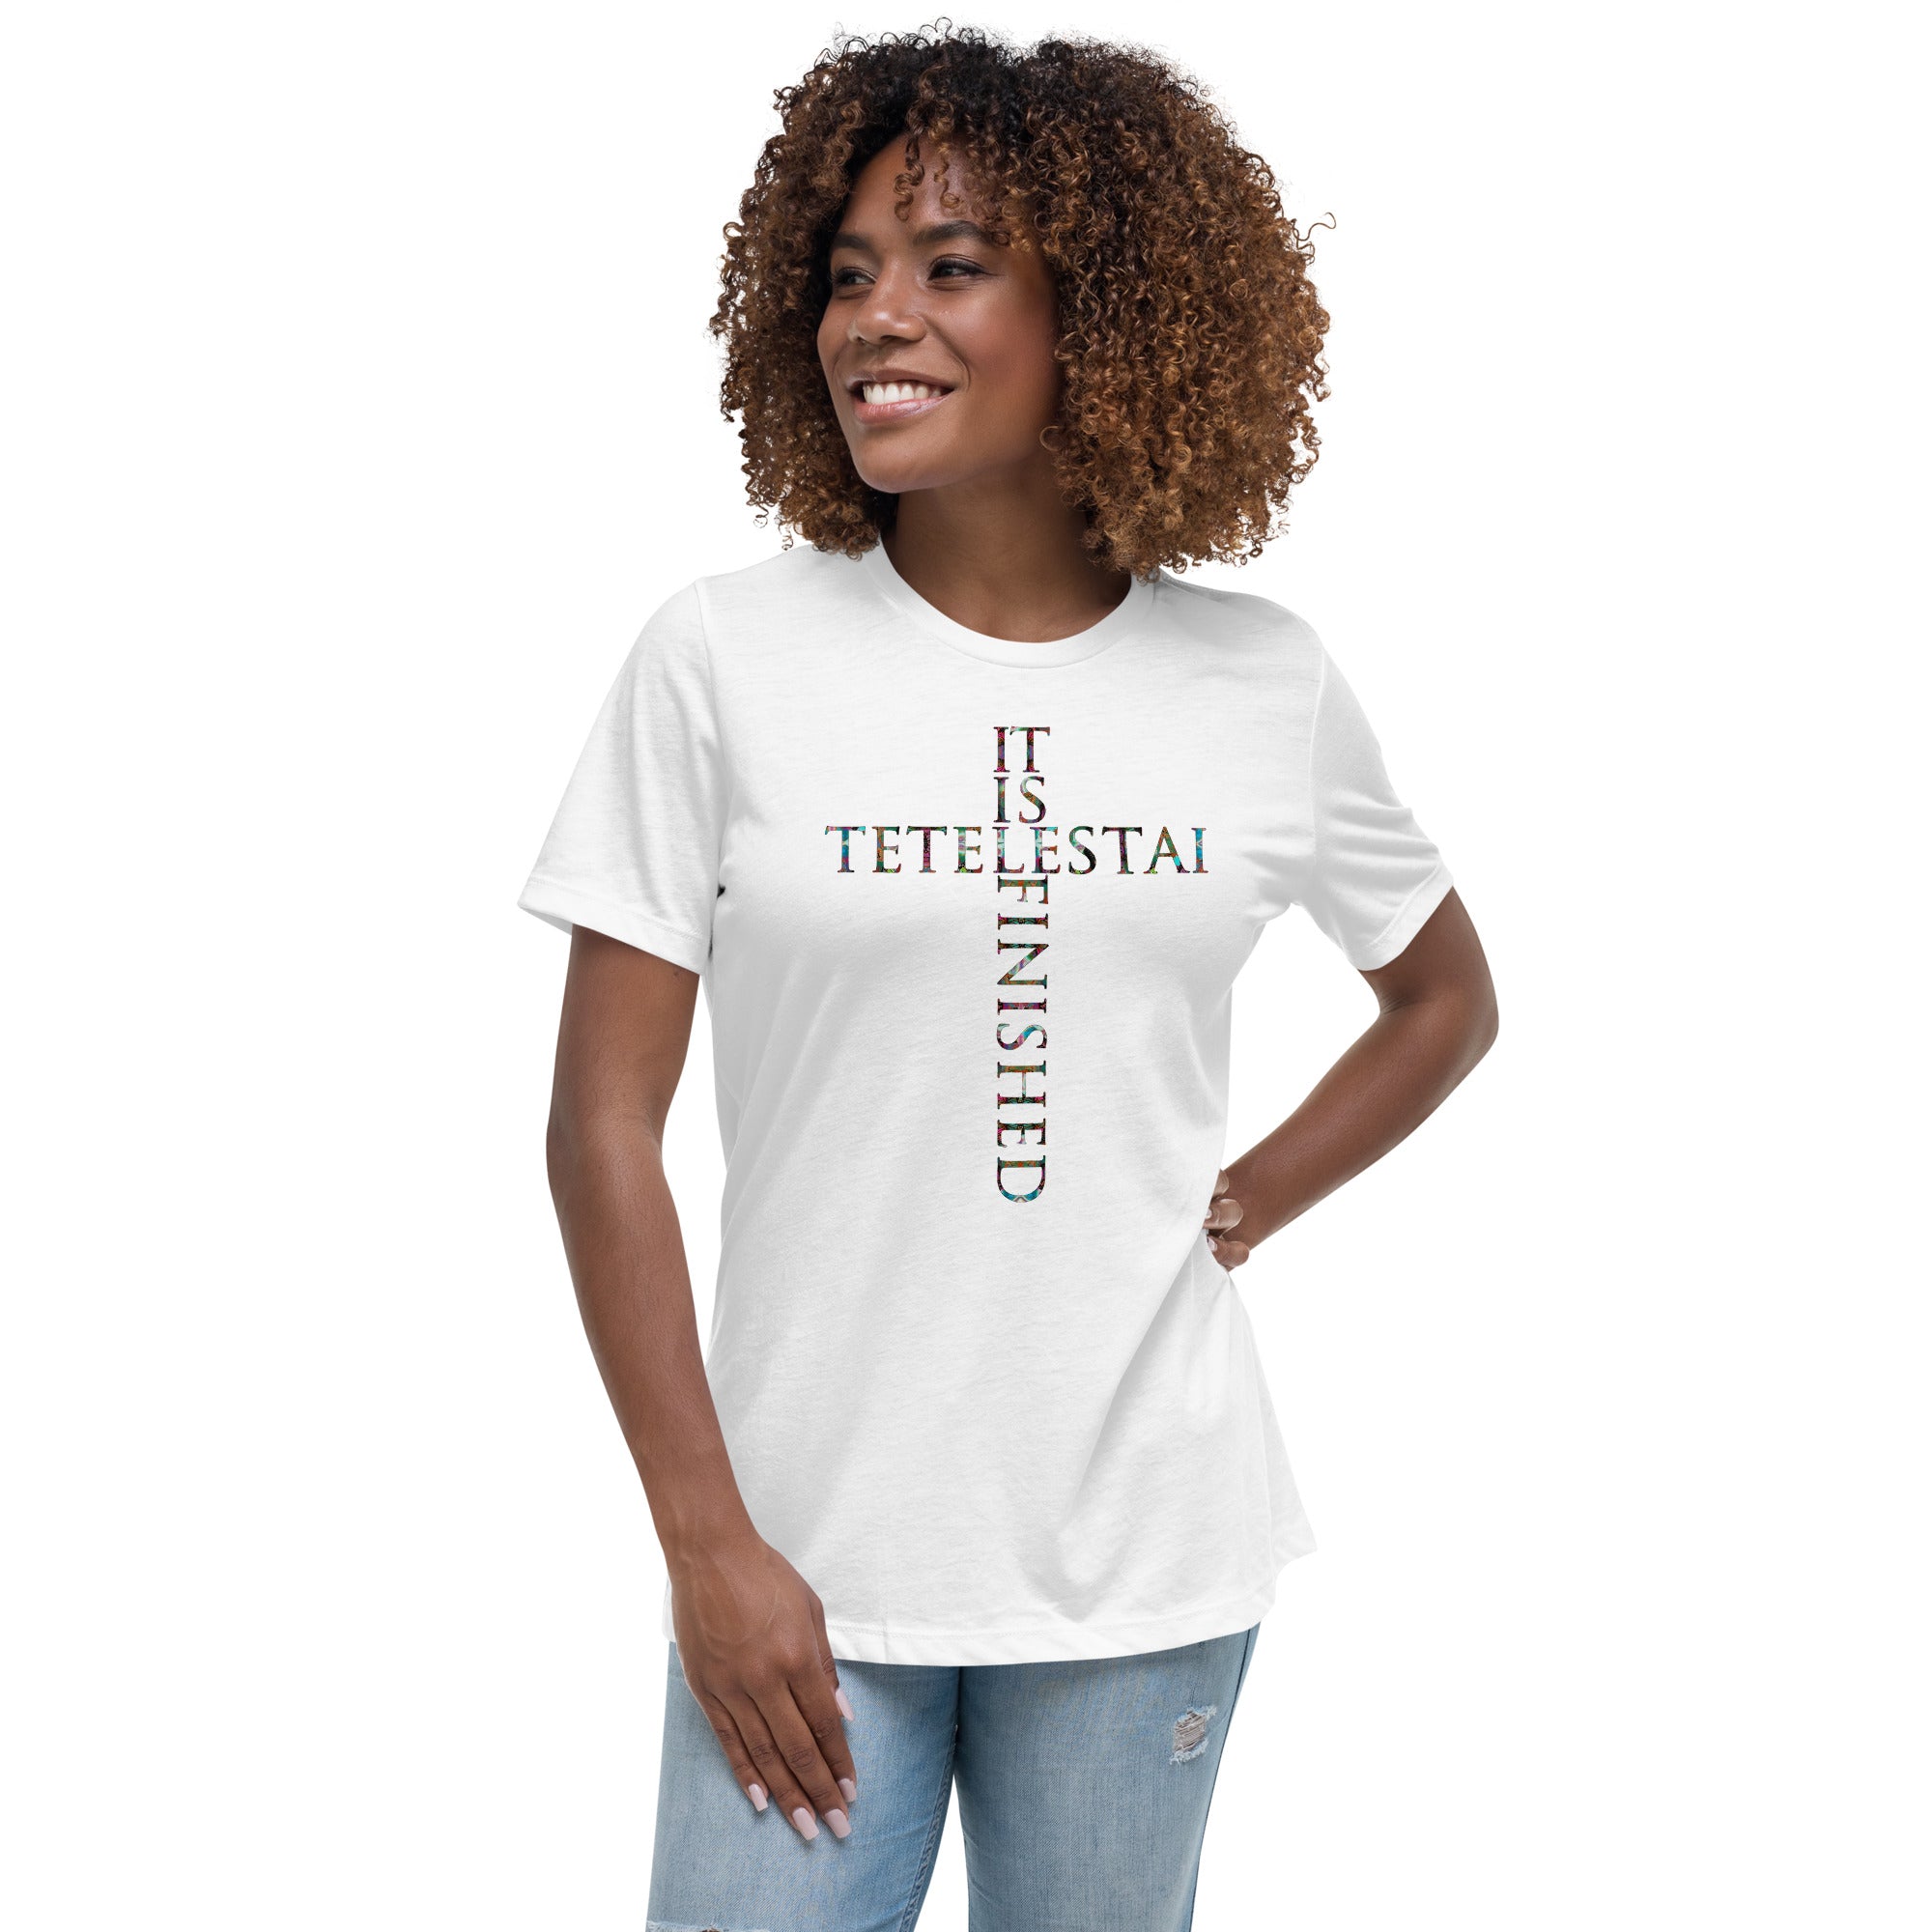 Tetelestai - It is Finished  ~ Butterfly Word Art Women's Graphic T-shirt, Short Sleeve Religious Spiritual Top